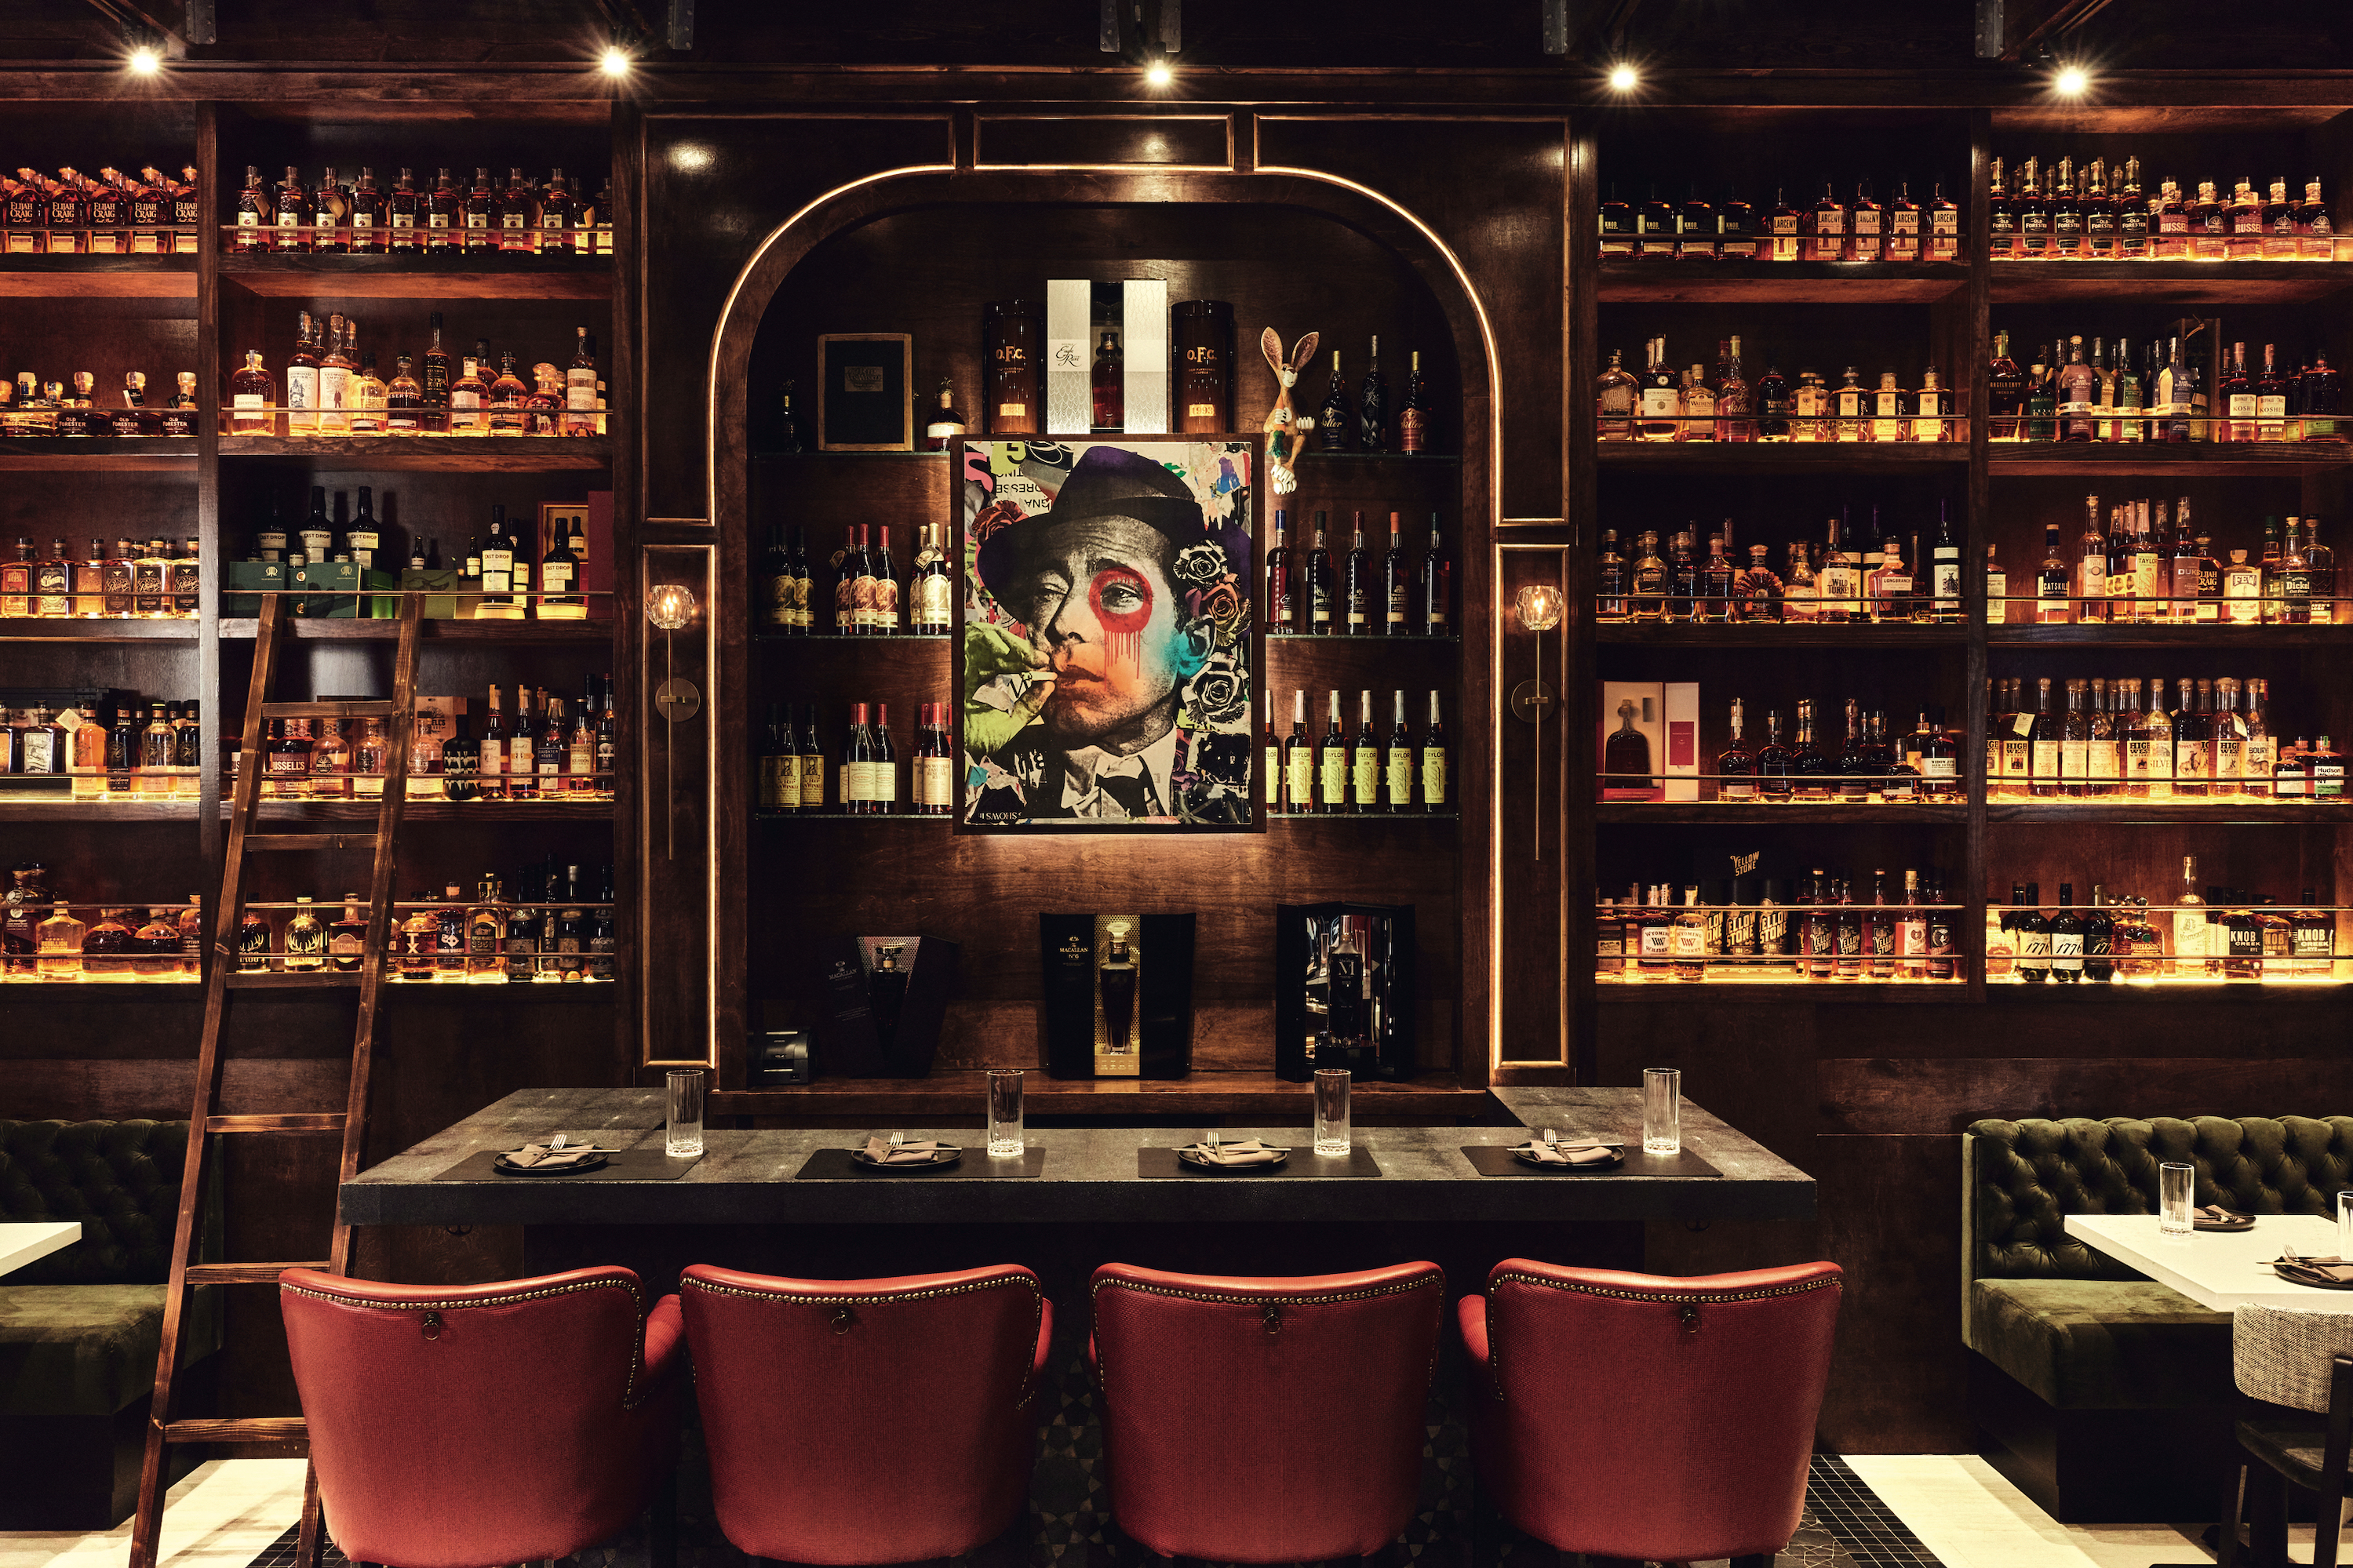 A whiskey bar with a painting of a man in the middle leather seats, many bottles, and warm lighting